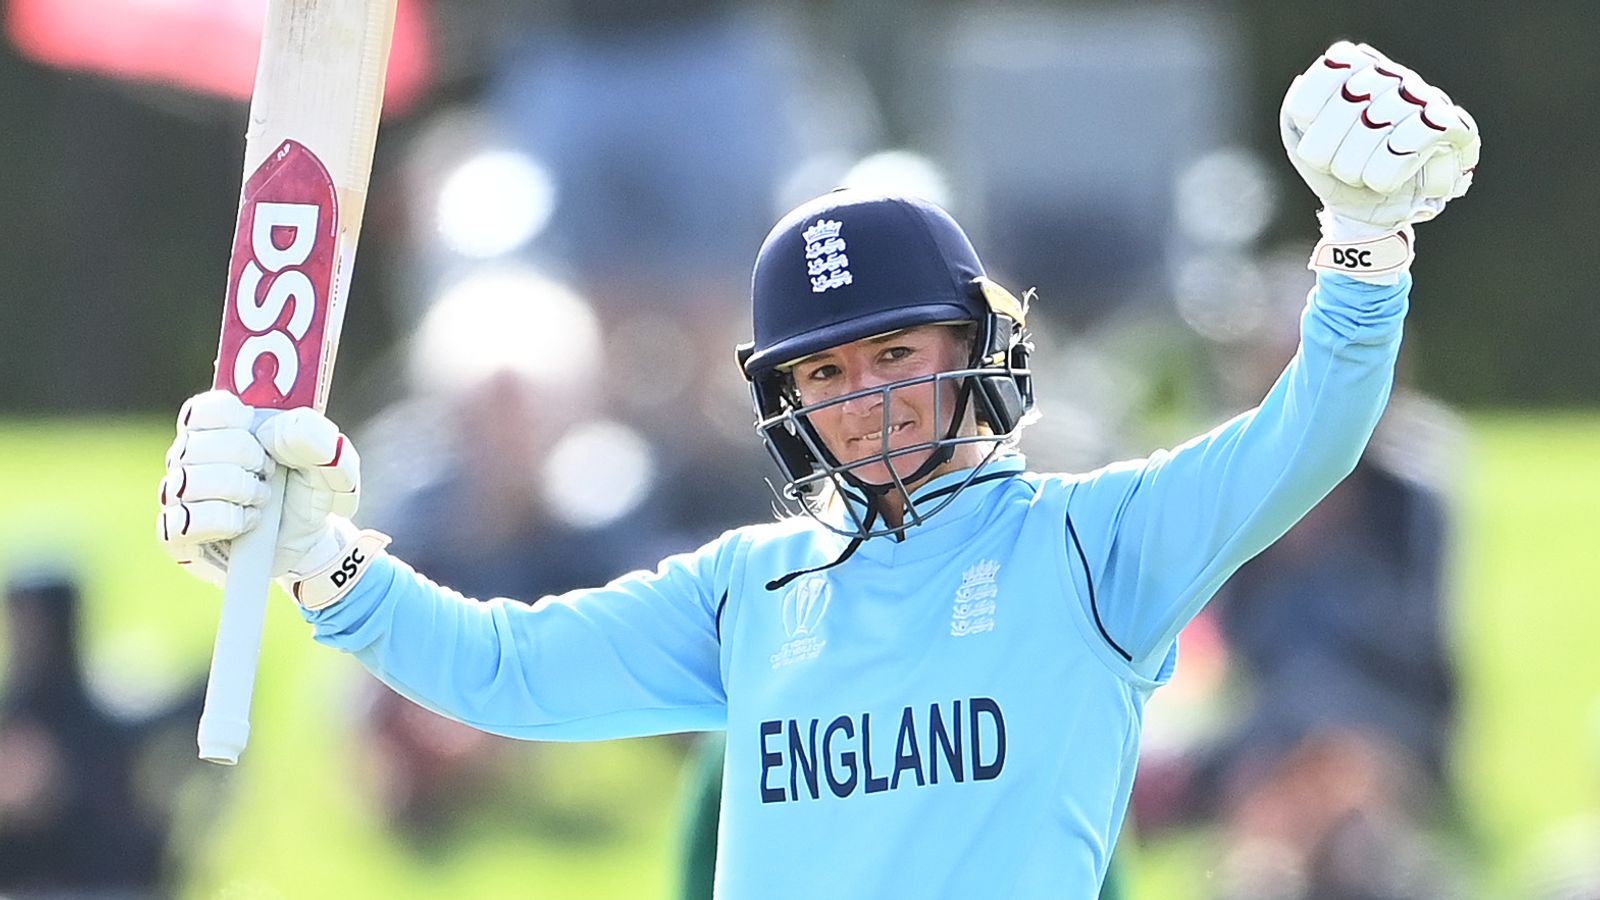 England’s Danni Wyatt excited for huge month of women’s sport ahead of ODI against South Africa